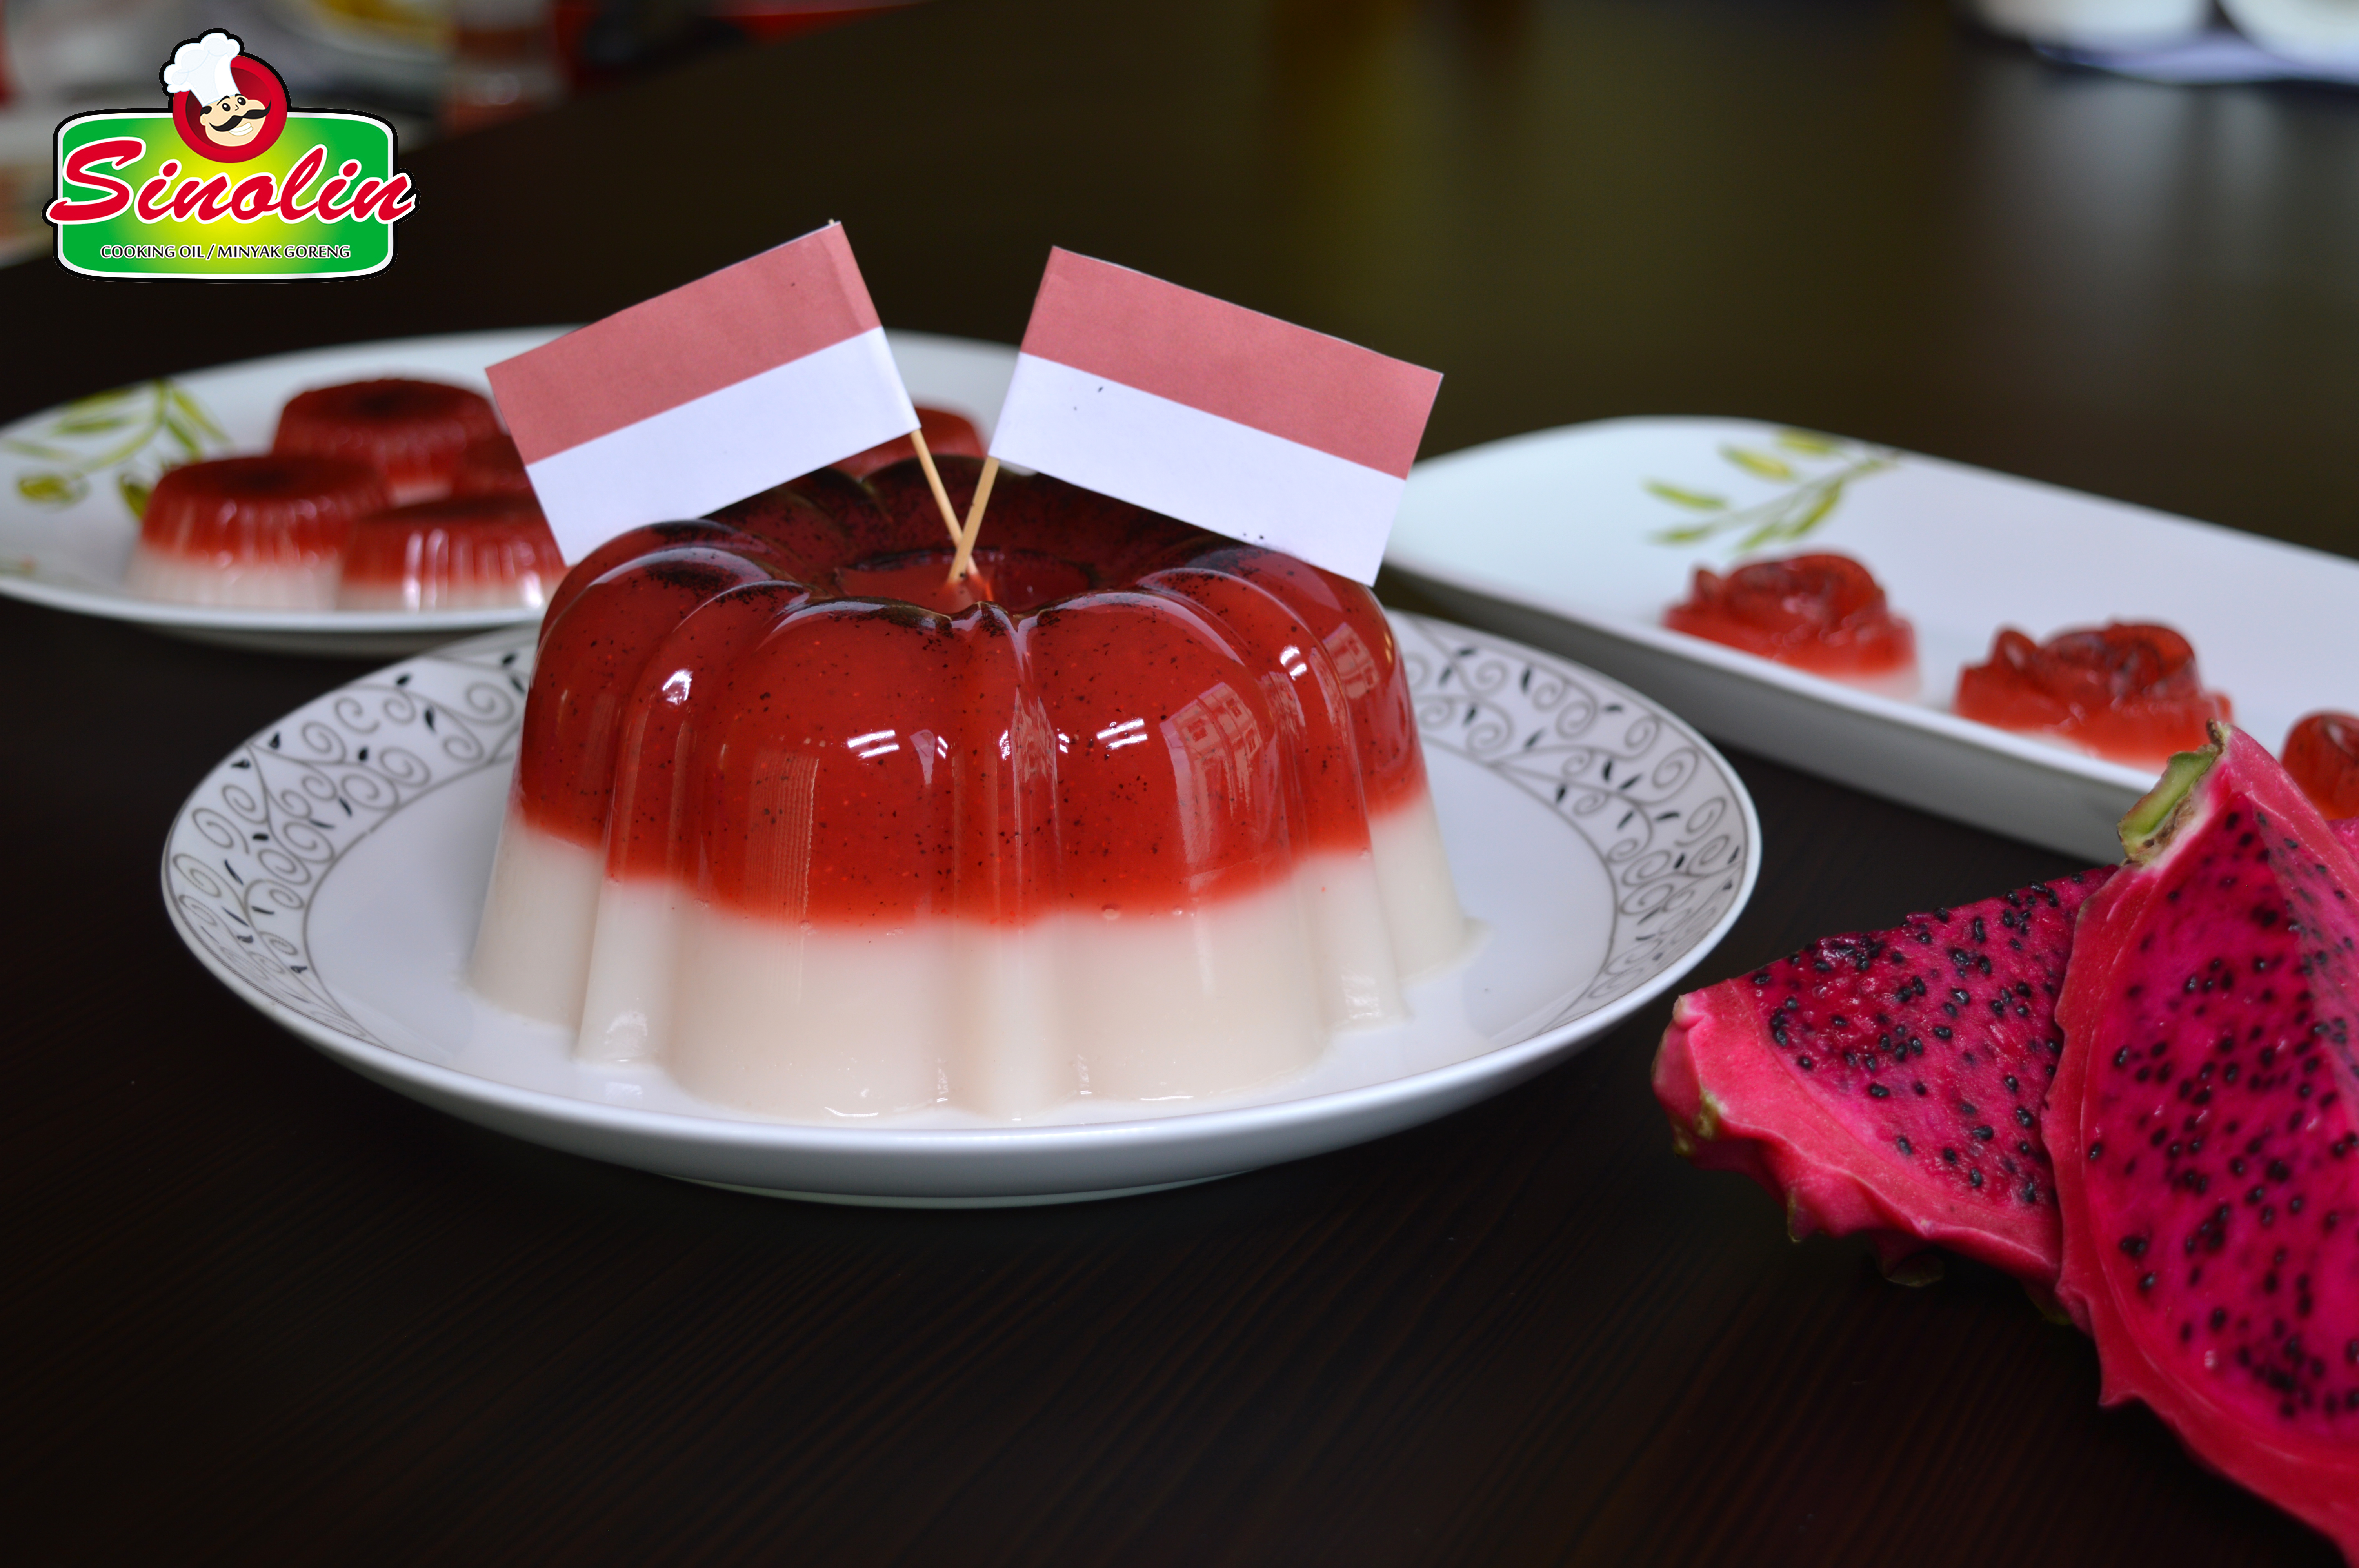 Indonesian Independence Puding by Dapur Sinolin